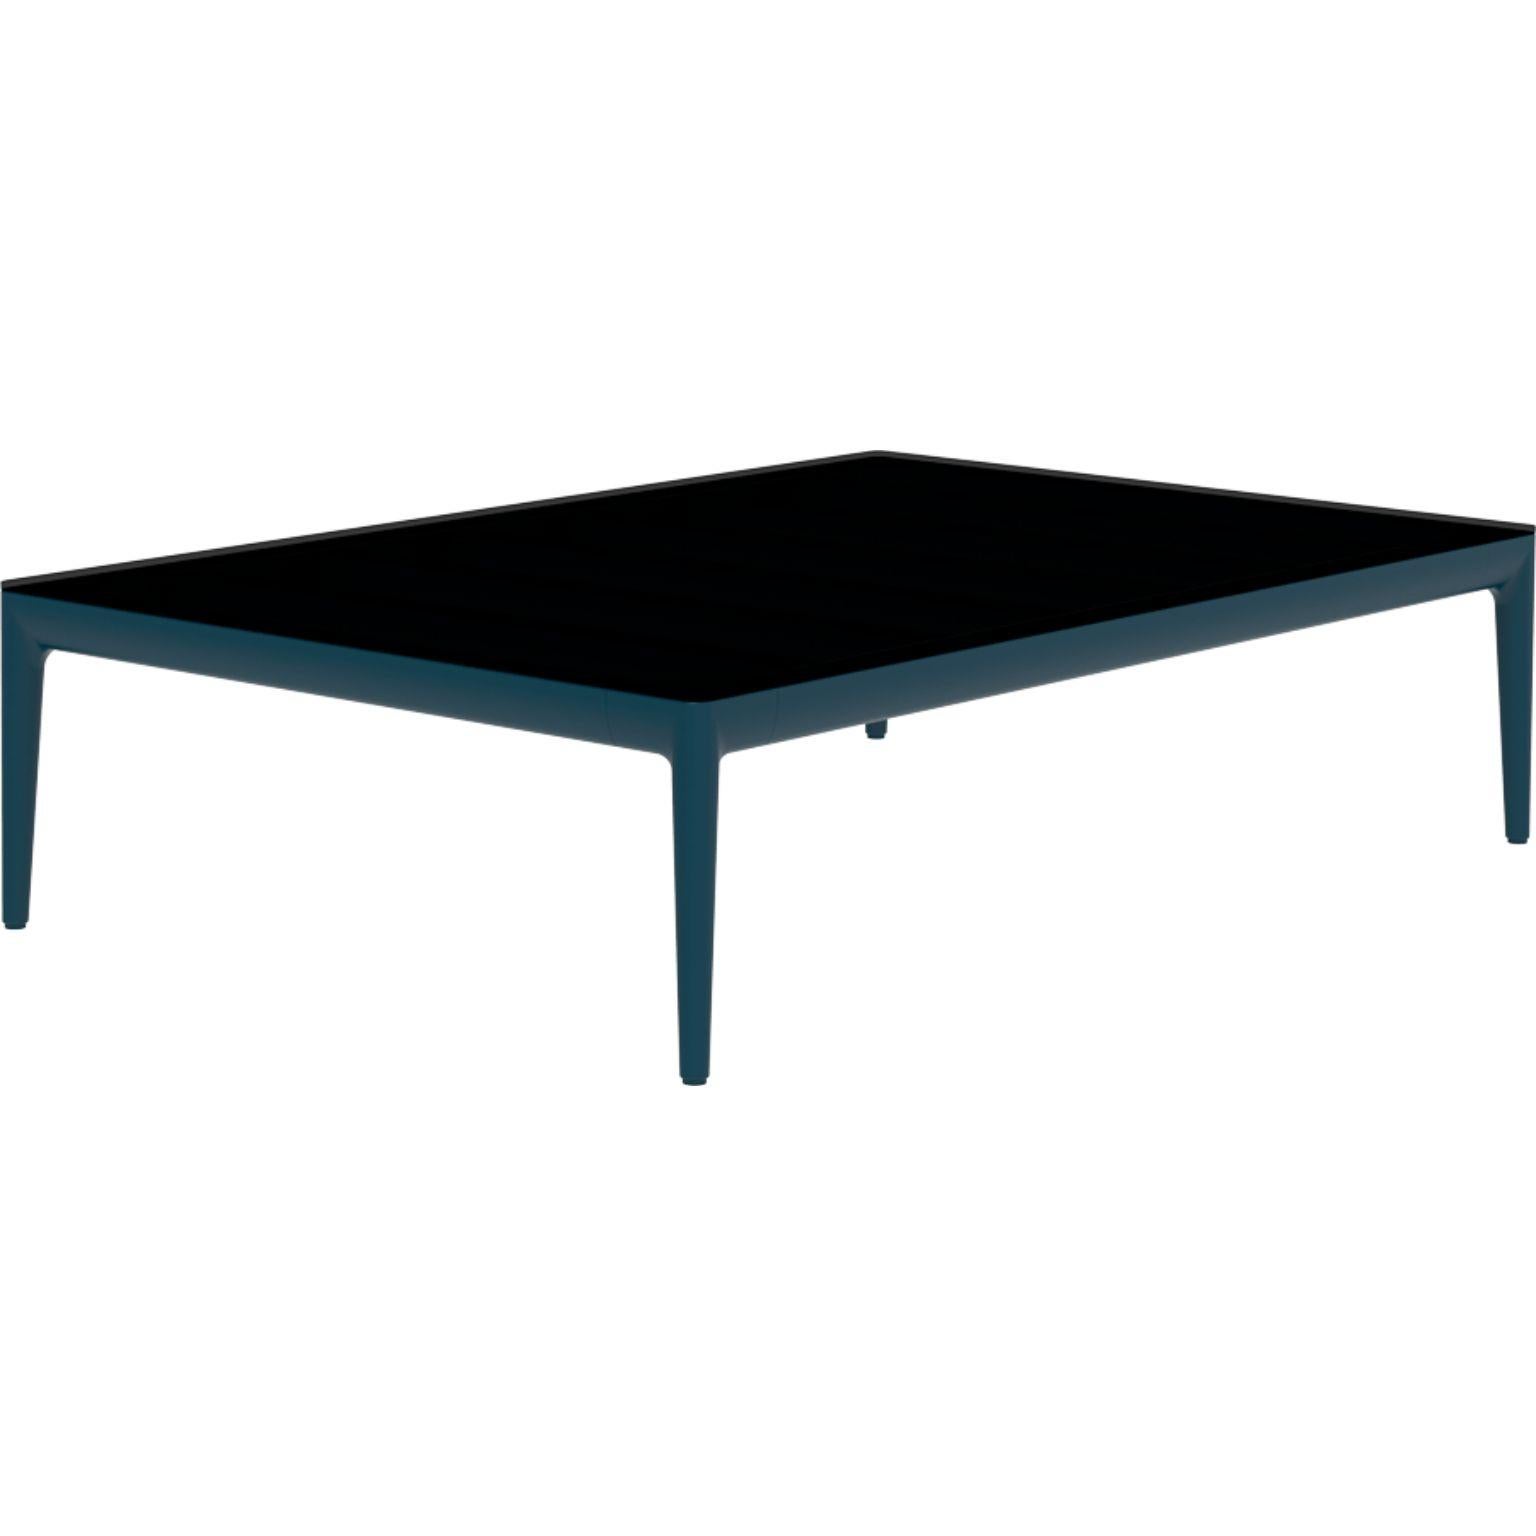 Ribbons Navy 115 coffee table by MOWEE
Dimensions: D76 x W115 x H29 cm
Material: Aluminum and HPL top.
Weight: 14.5 kg.
Also available in different colors and finishes. (HPL Black Edge or Neolith top). 

An unmistakable collection for its